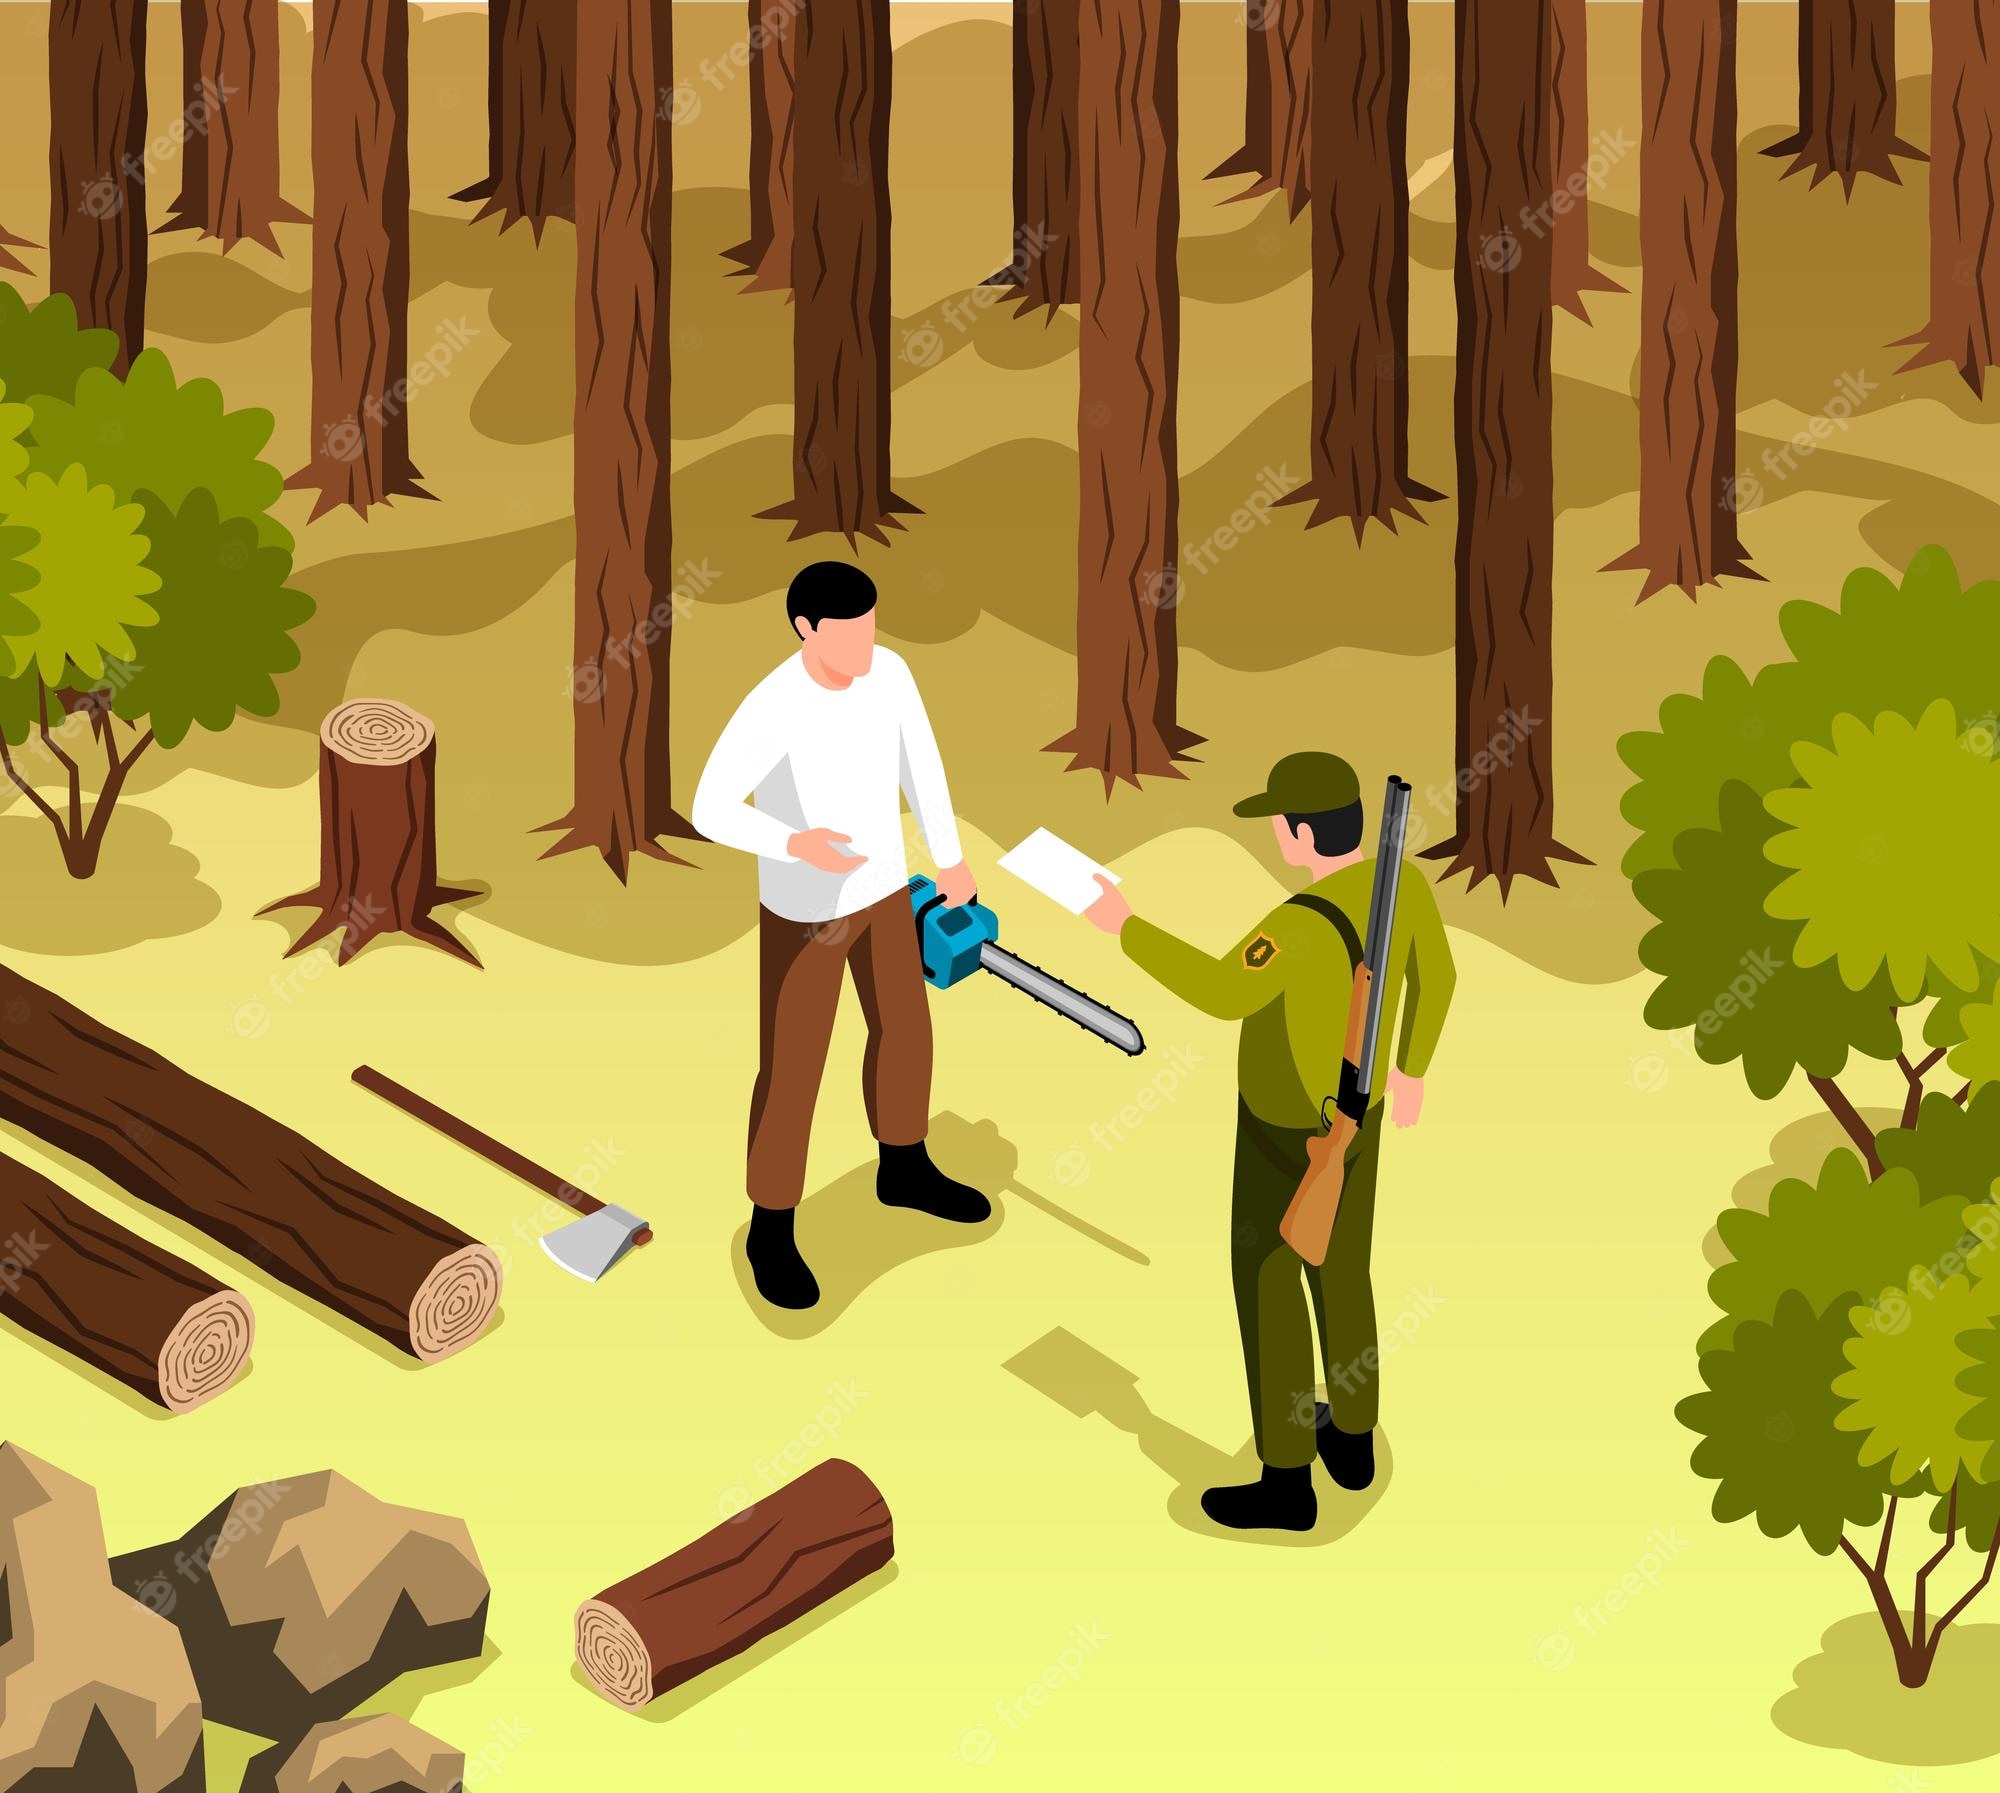 loggers clipart